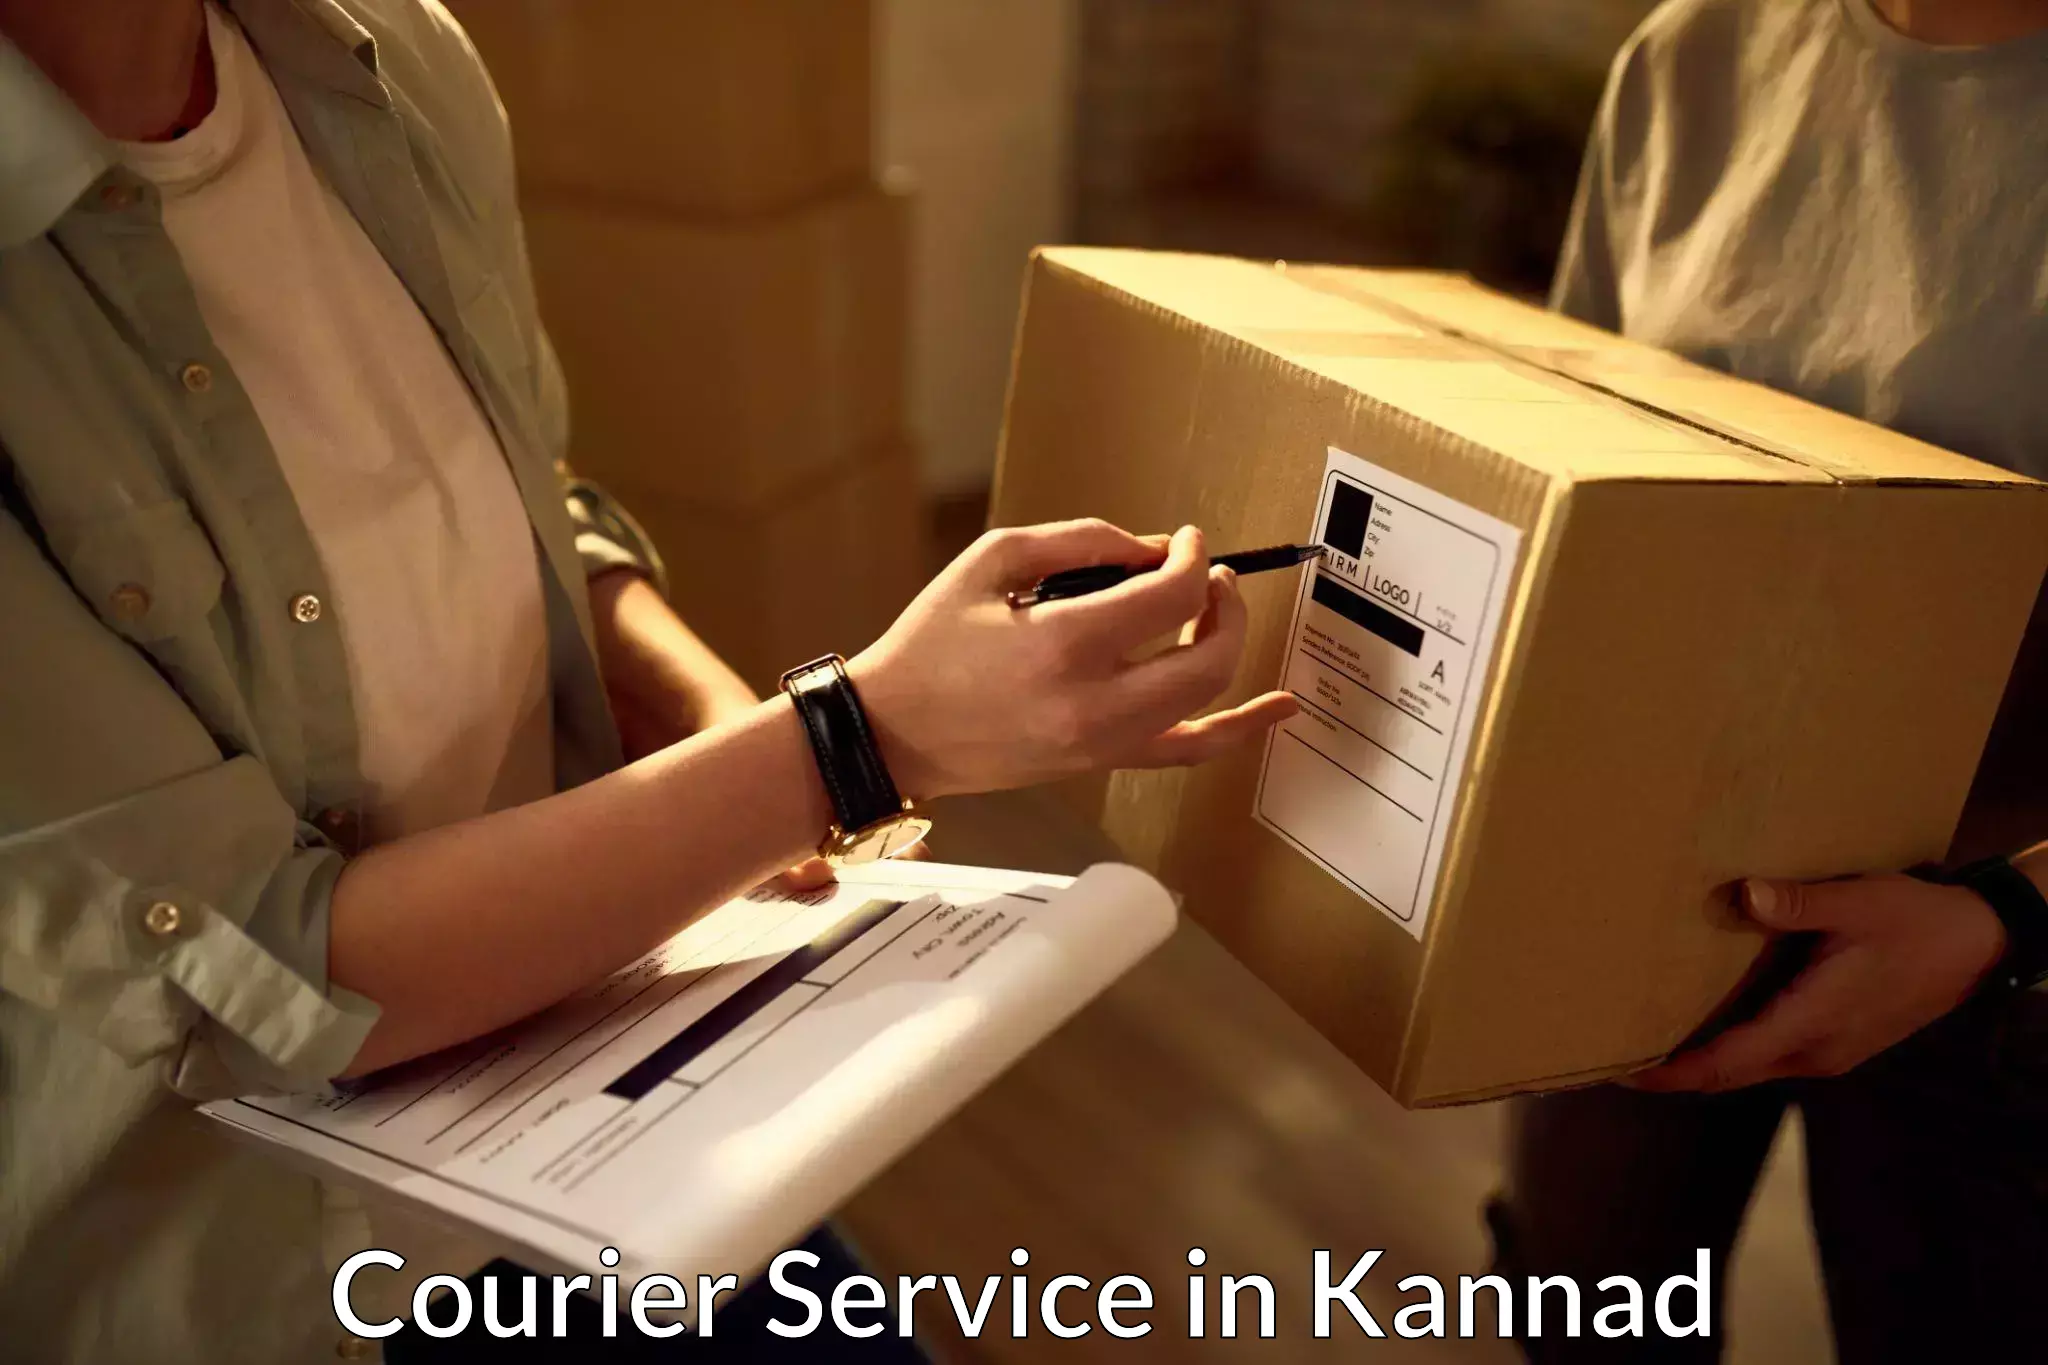 Advanced freight services in Kannad